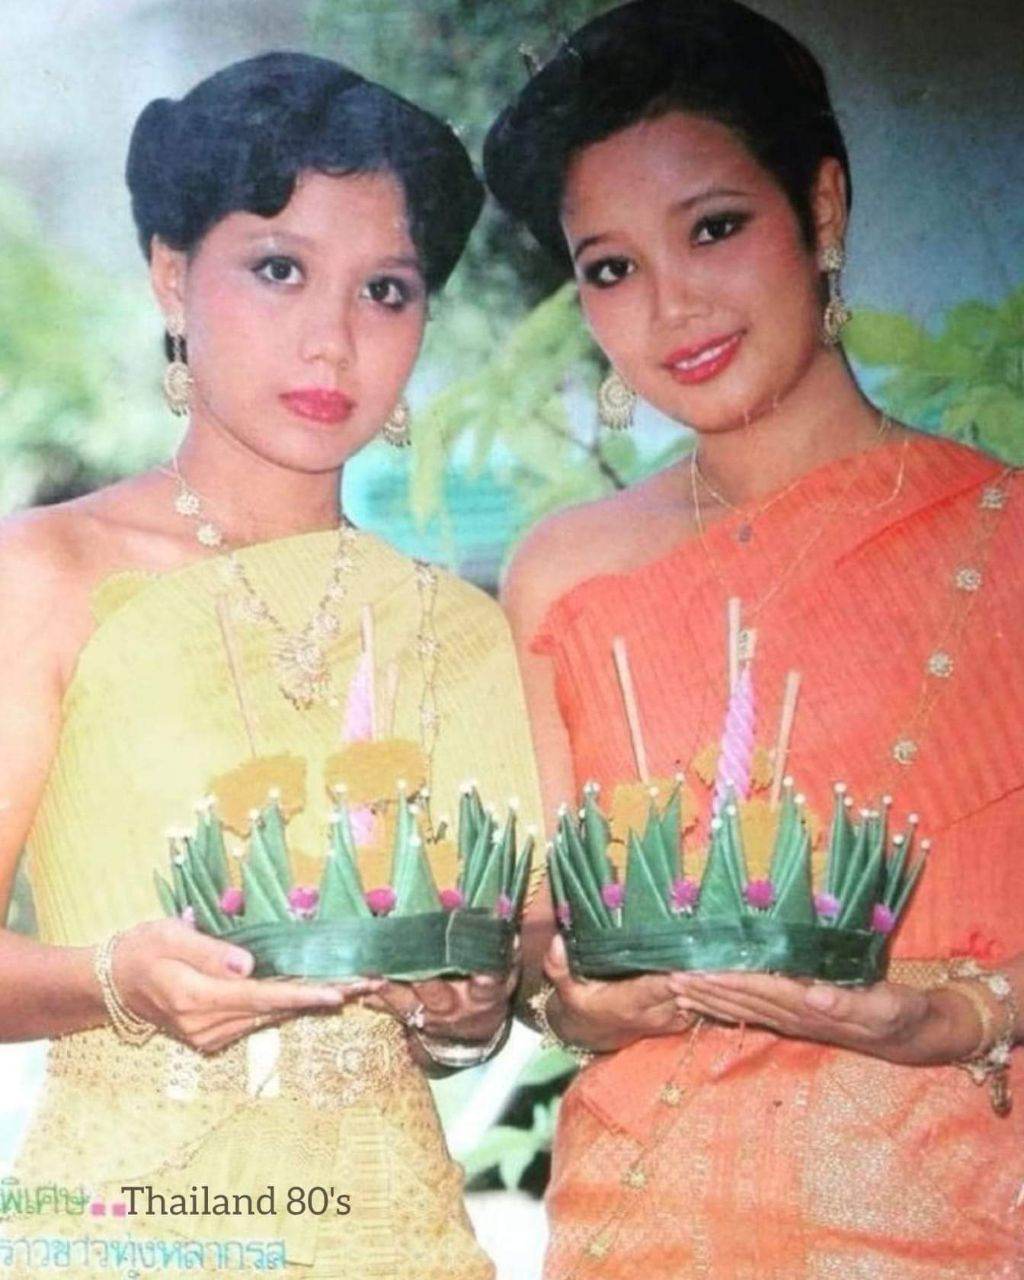 Loy Krathong festival from the old magazines 70's - 90's   #LoykrathongThailand